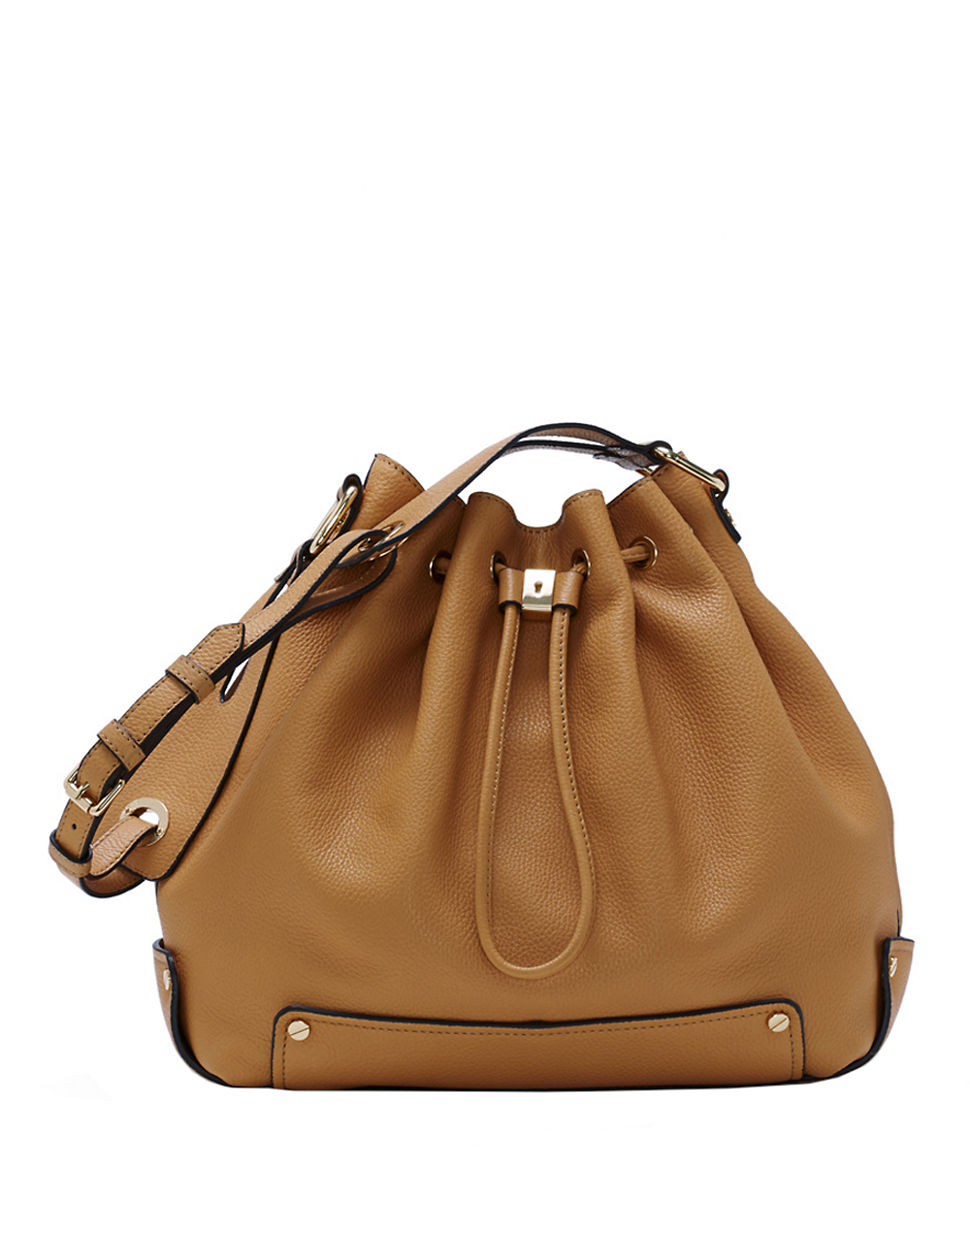 Vince Camuto Jill Leather Drawstring Bag in Brown | Lyst